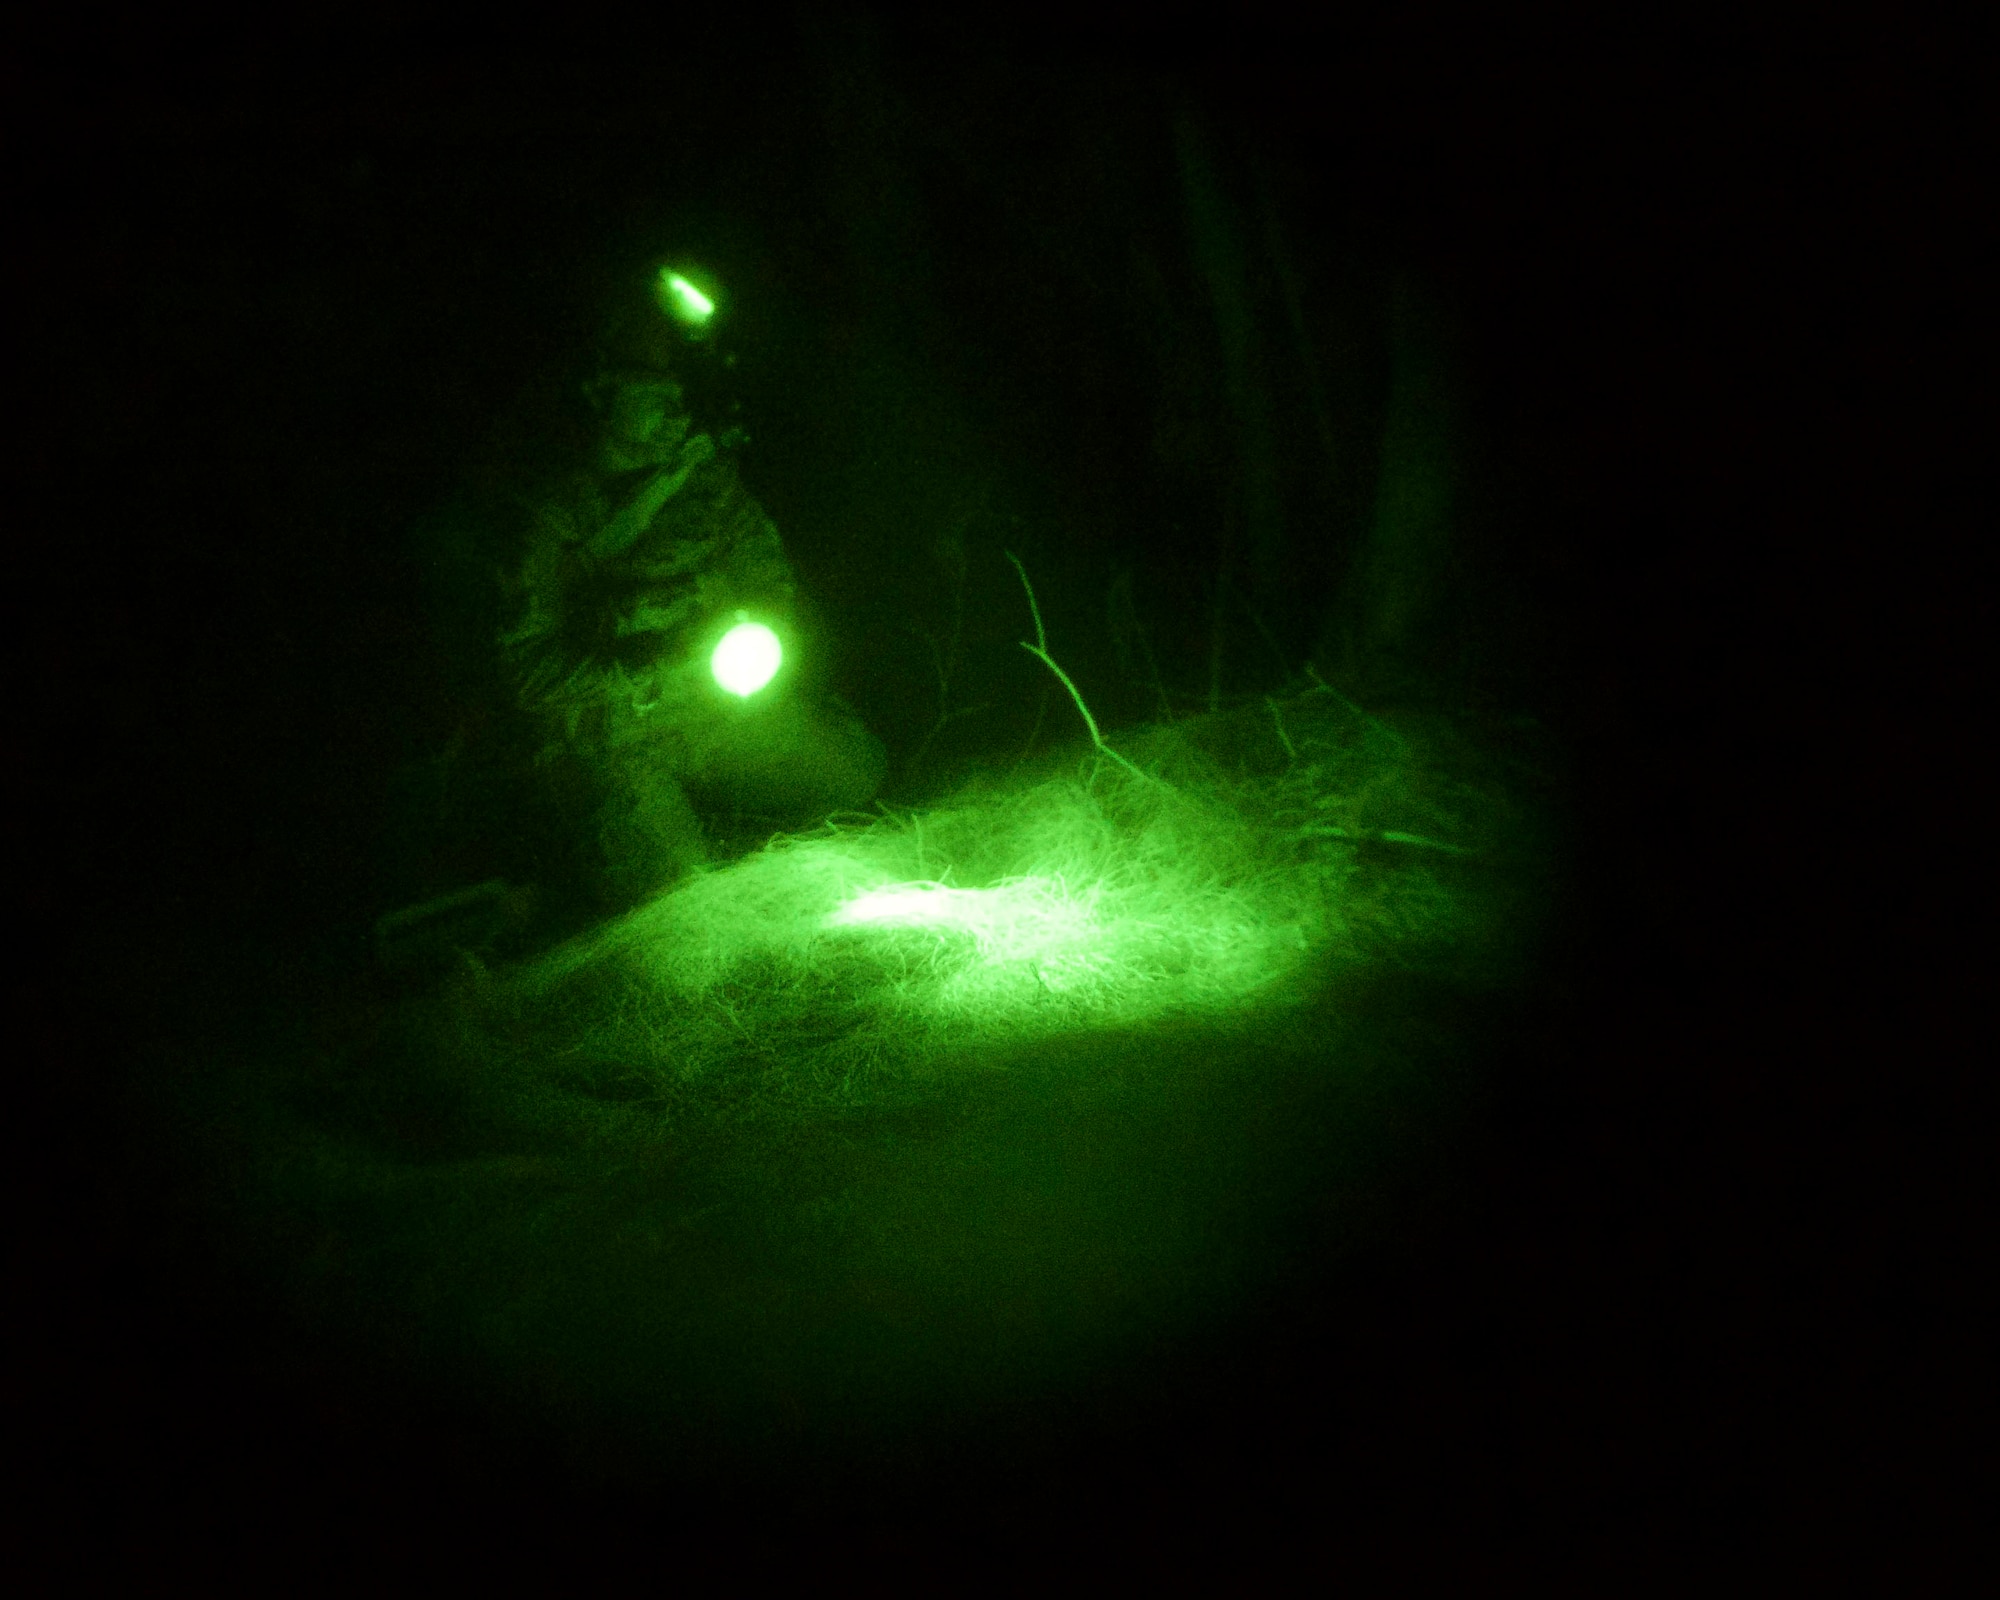 Staff. Sgt. Jason Cohen, 482nd Civil Engineering Squadron Explosive Ordnance Disposal Flight team member, uses an infrared light and night vision goggles to locate and examine an improvised explosive device during night operations at Homestead Air Reserve Base, Fla., April 8. The EOD Flight conducted dismounted counter-IED operations as part of a weeklong training exercise aimed to prepare the reservists for combat operations. (U.S. Air Force photo by Staff Sgt. Jaimi L. Upthegrove)